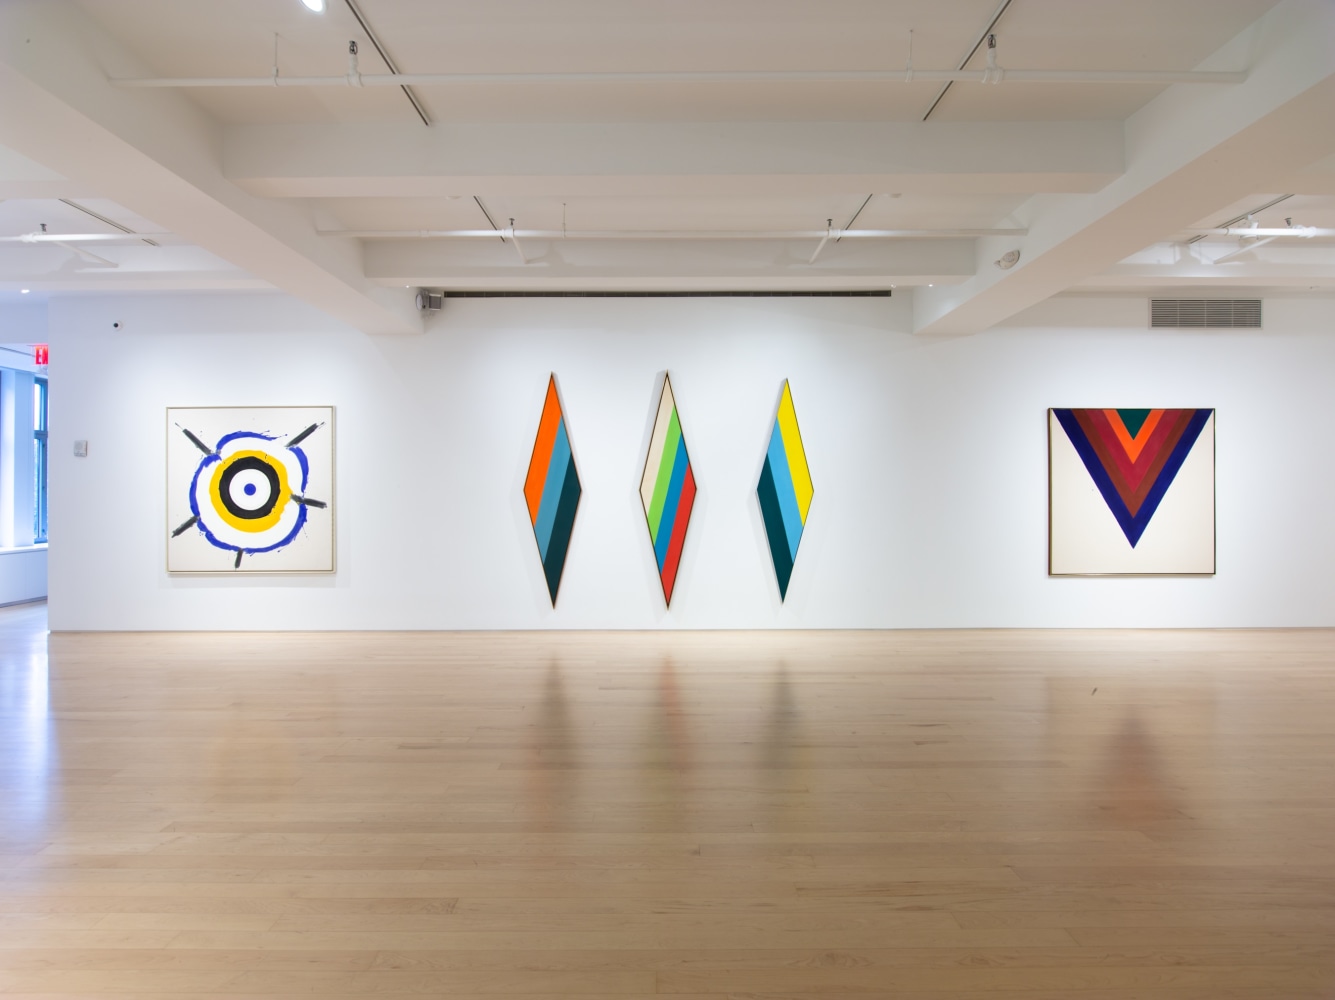 Kenneth Noland: Context is the Key